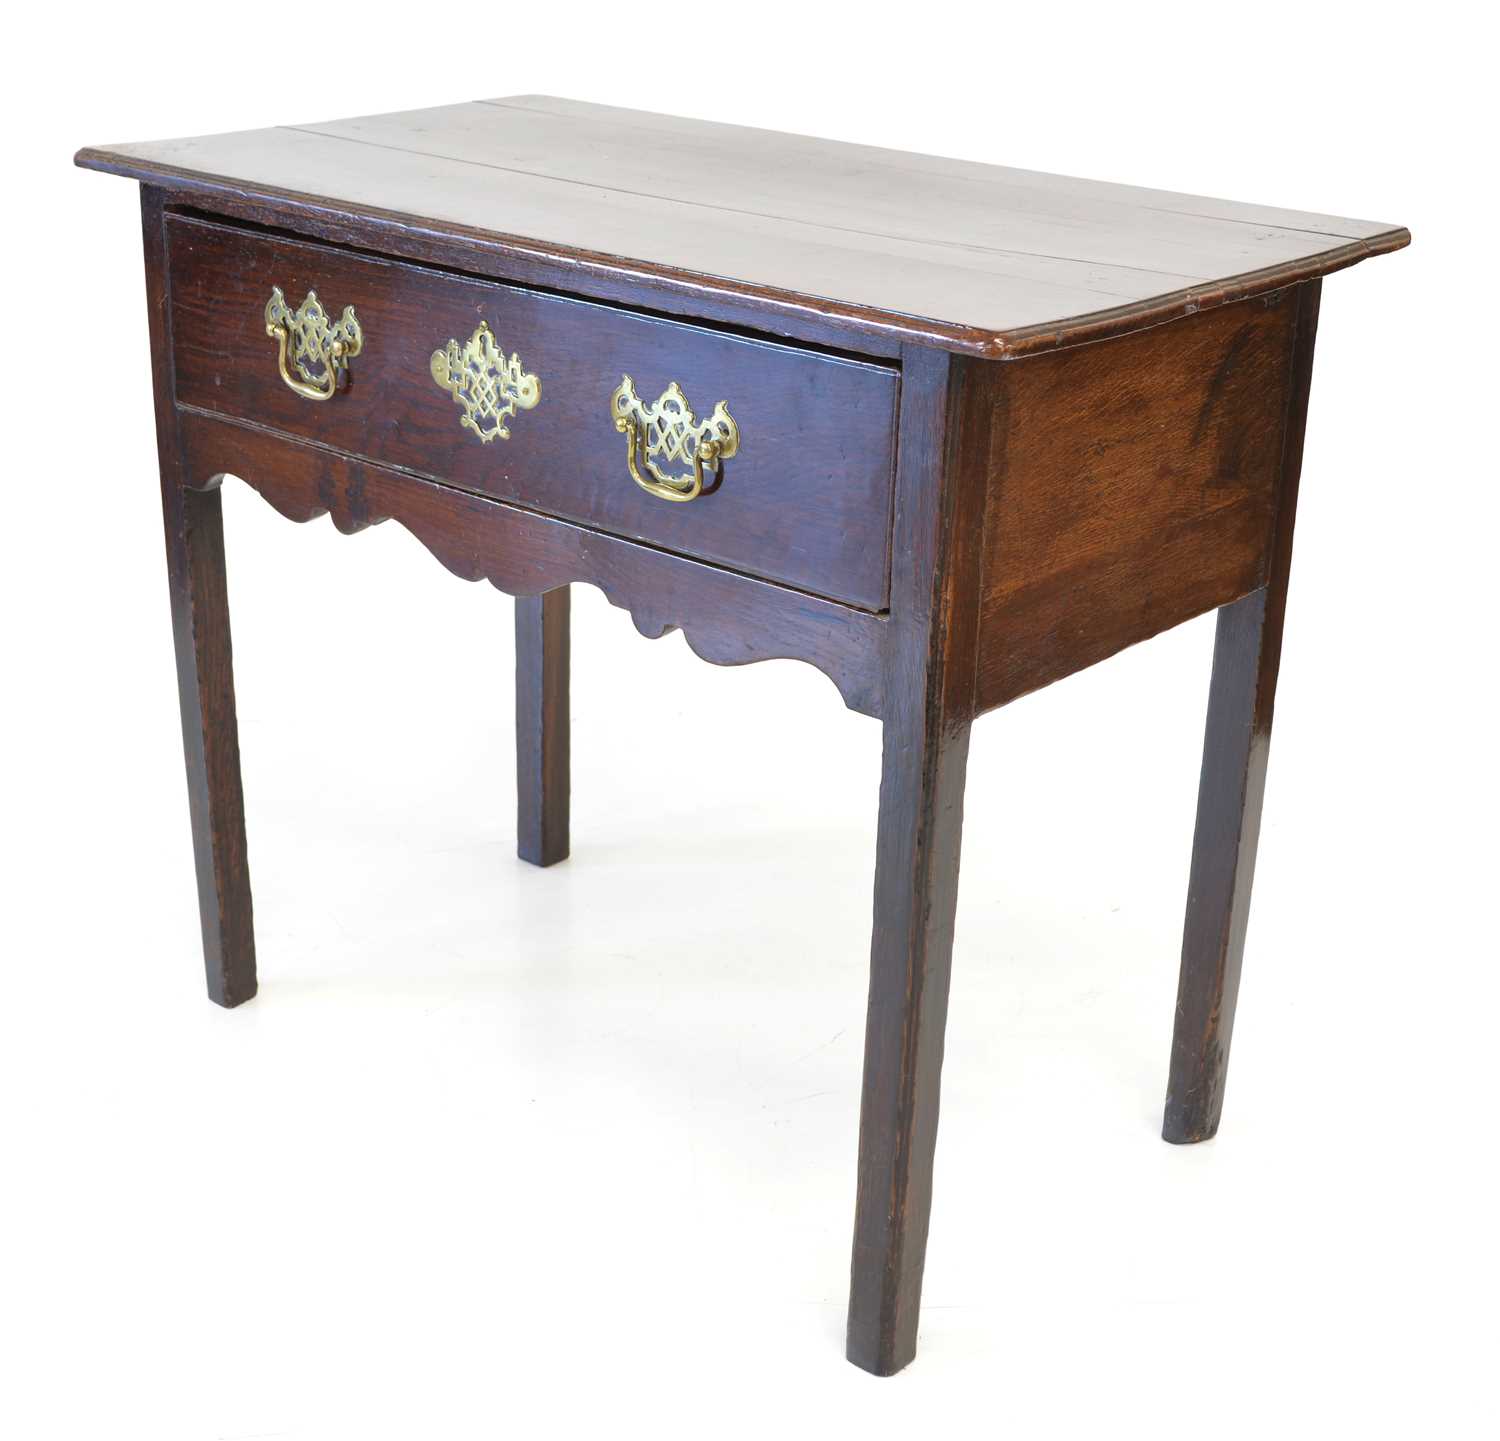 Early 19th-century oak side table - Image 2 of 4